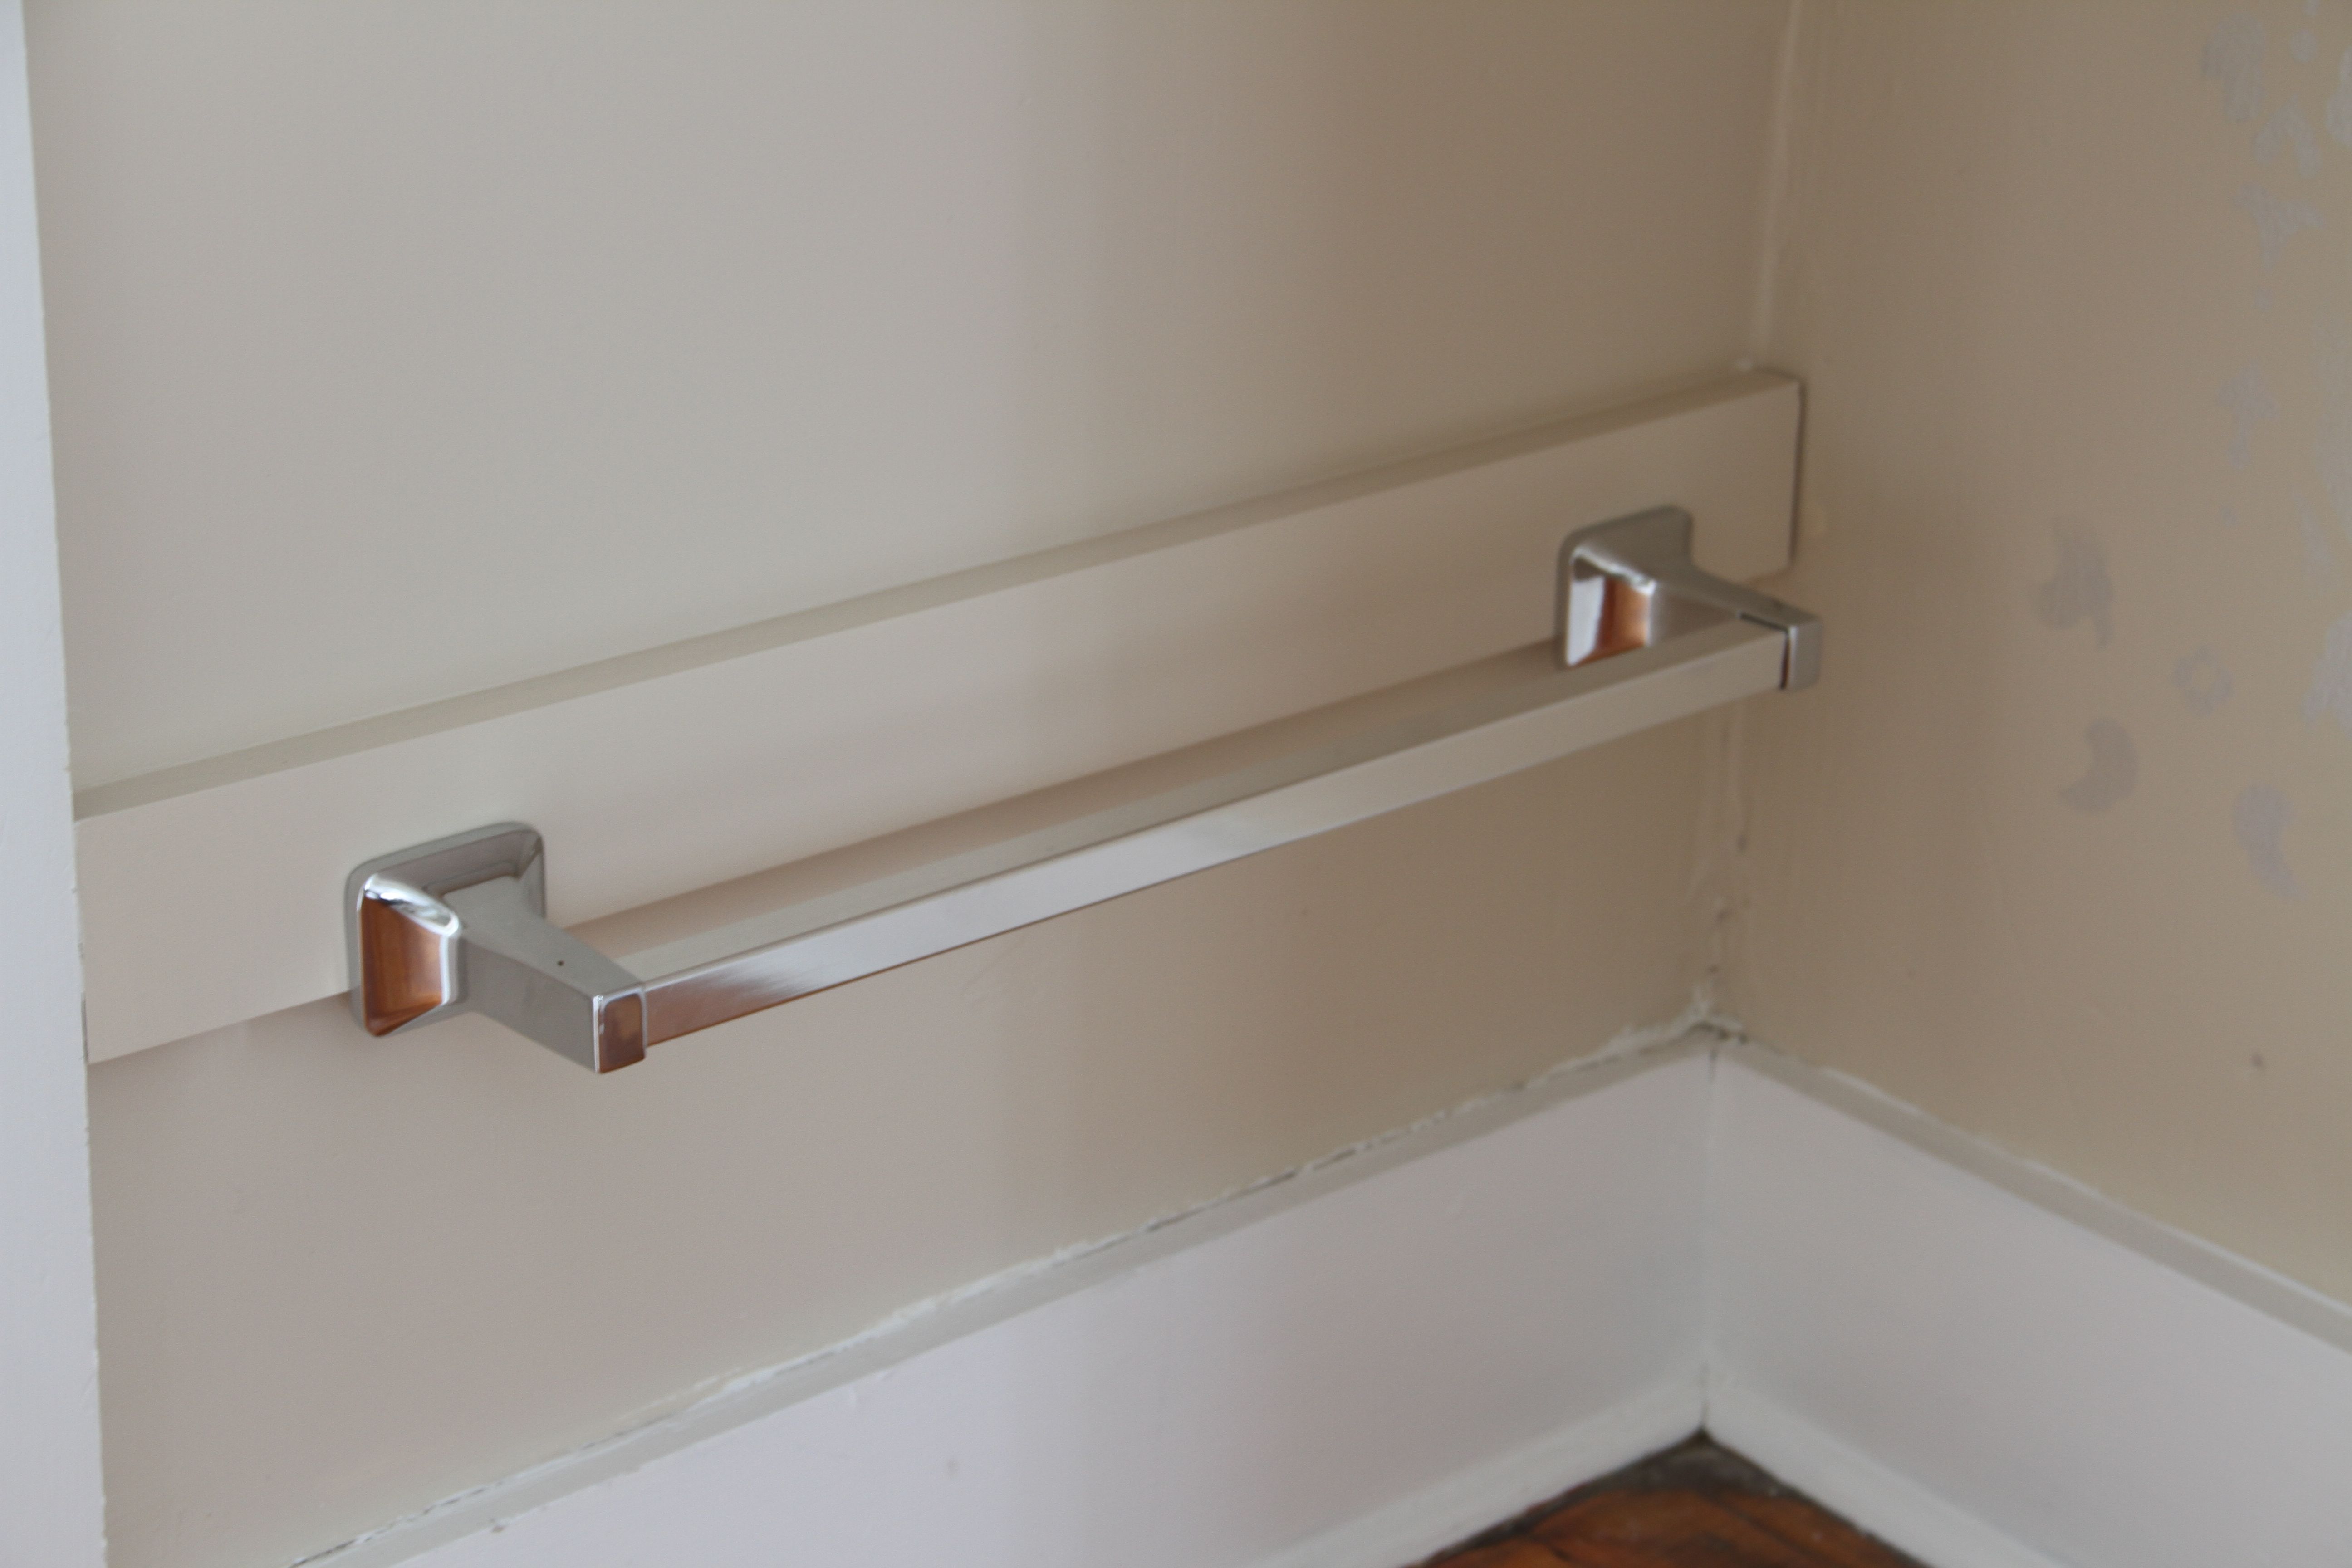 AFTER: The silver towel bars are for hanging the laundry baskets from. We needed something that would be about 3-1/2" total and the towel bar plus the wood was exactly right. Score!